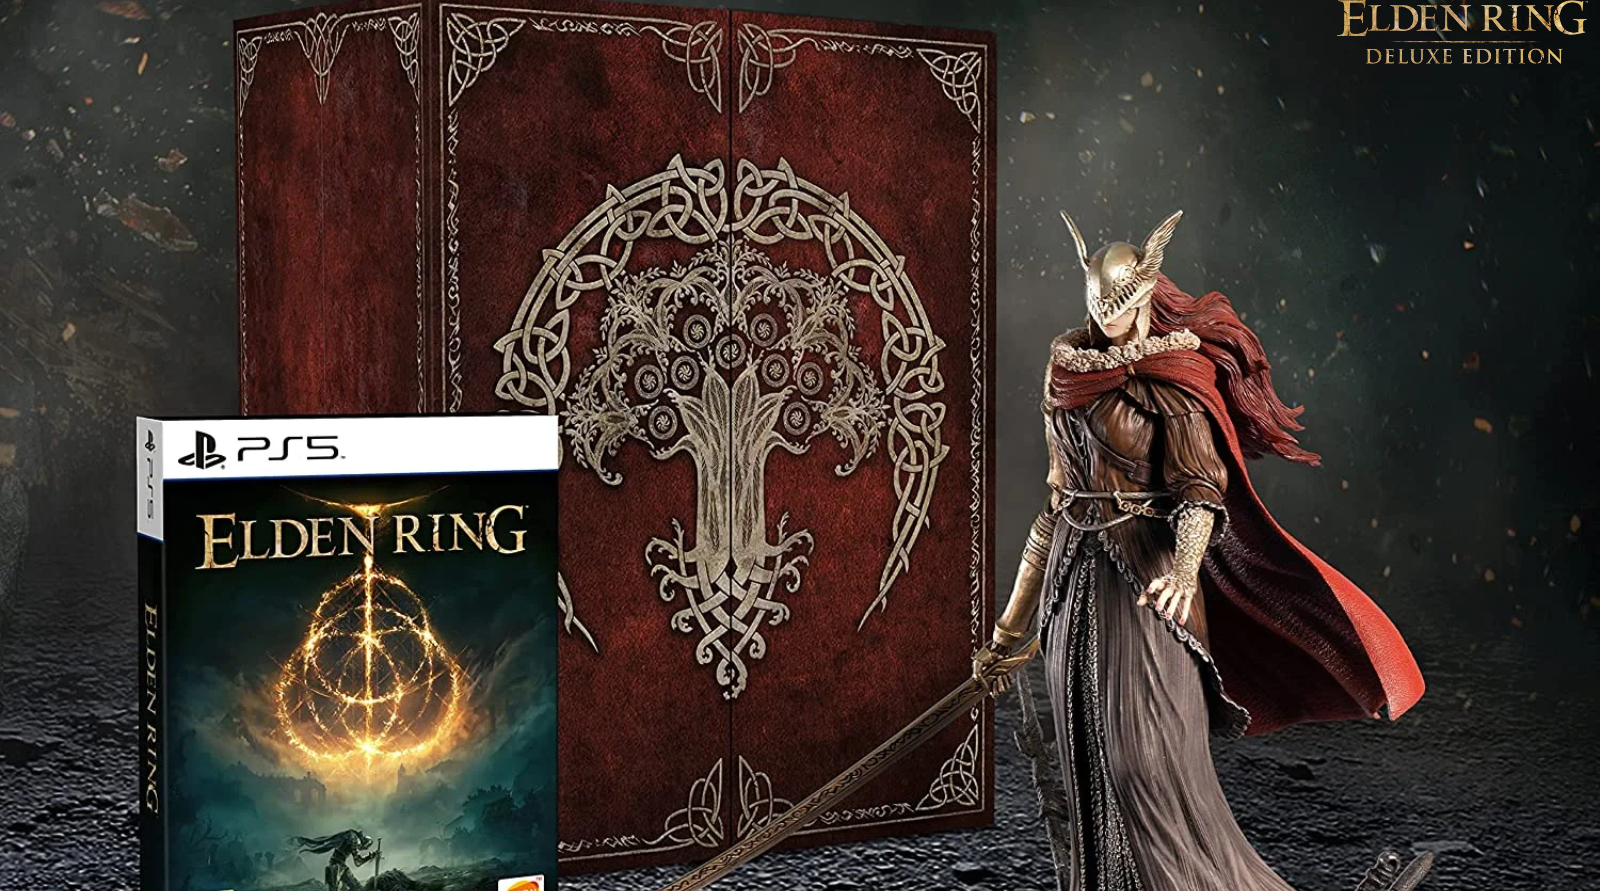 You are currently viewing Elden Ring: Deluxe Edition Crack Free Download v 1.02 + DLC LifeTime 2022